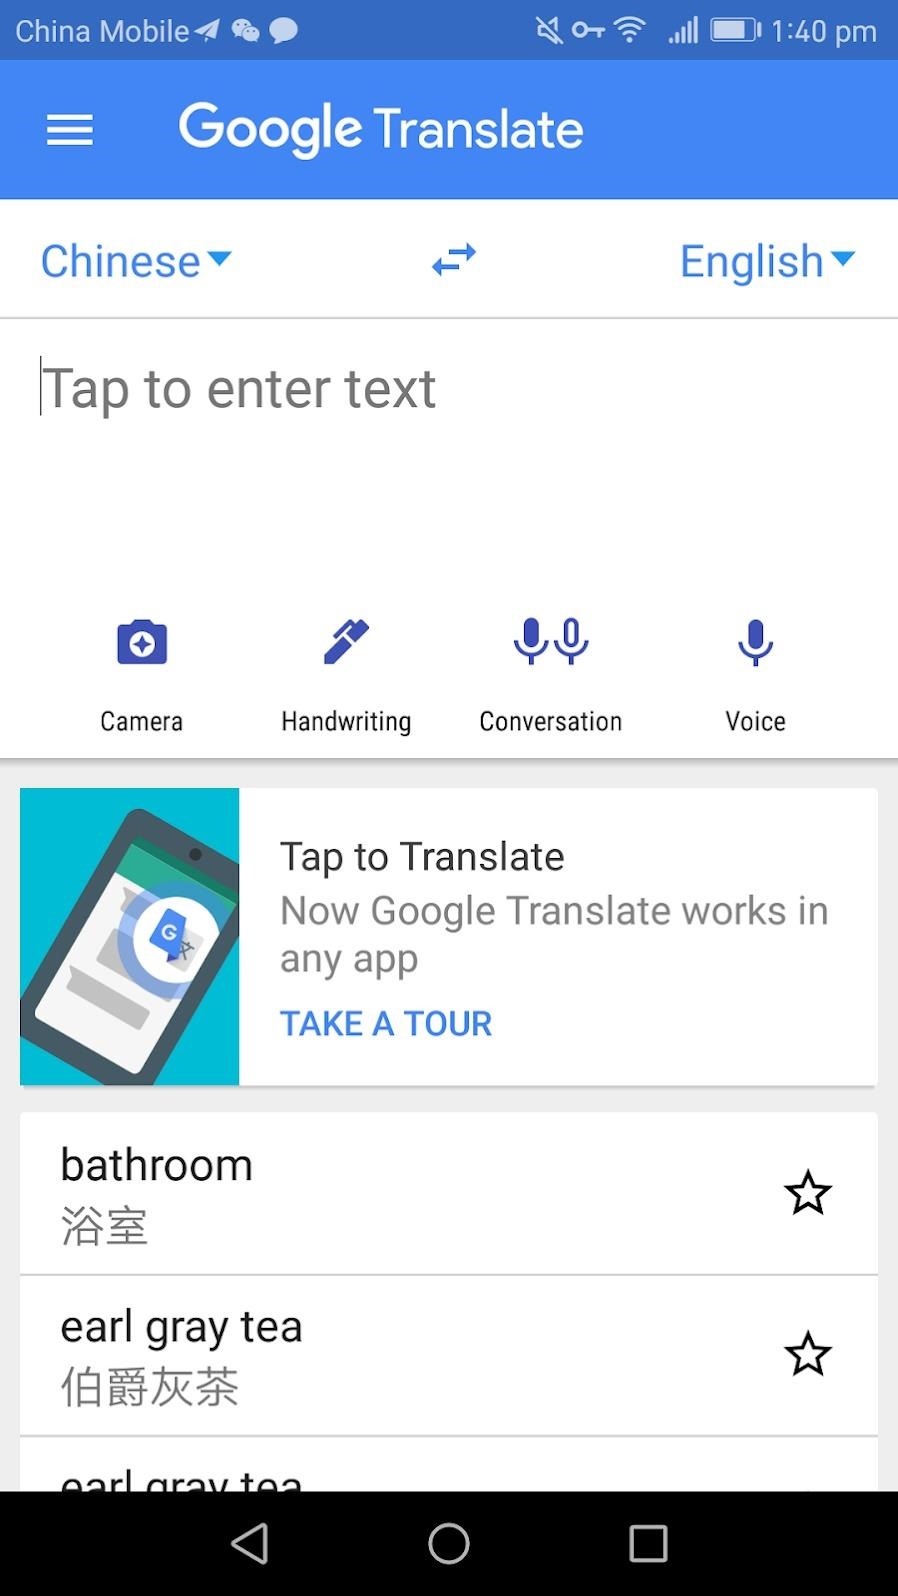 How to Use Google Translate to Translate Text You See in the Real World